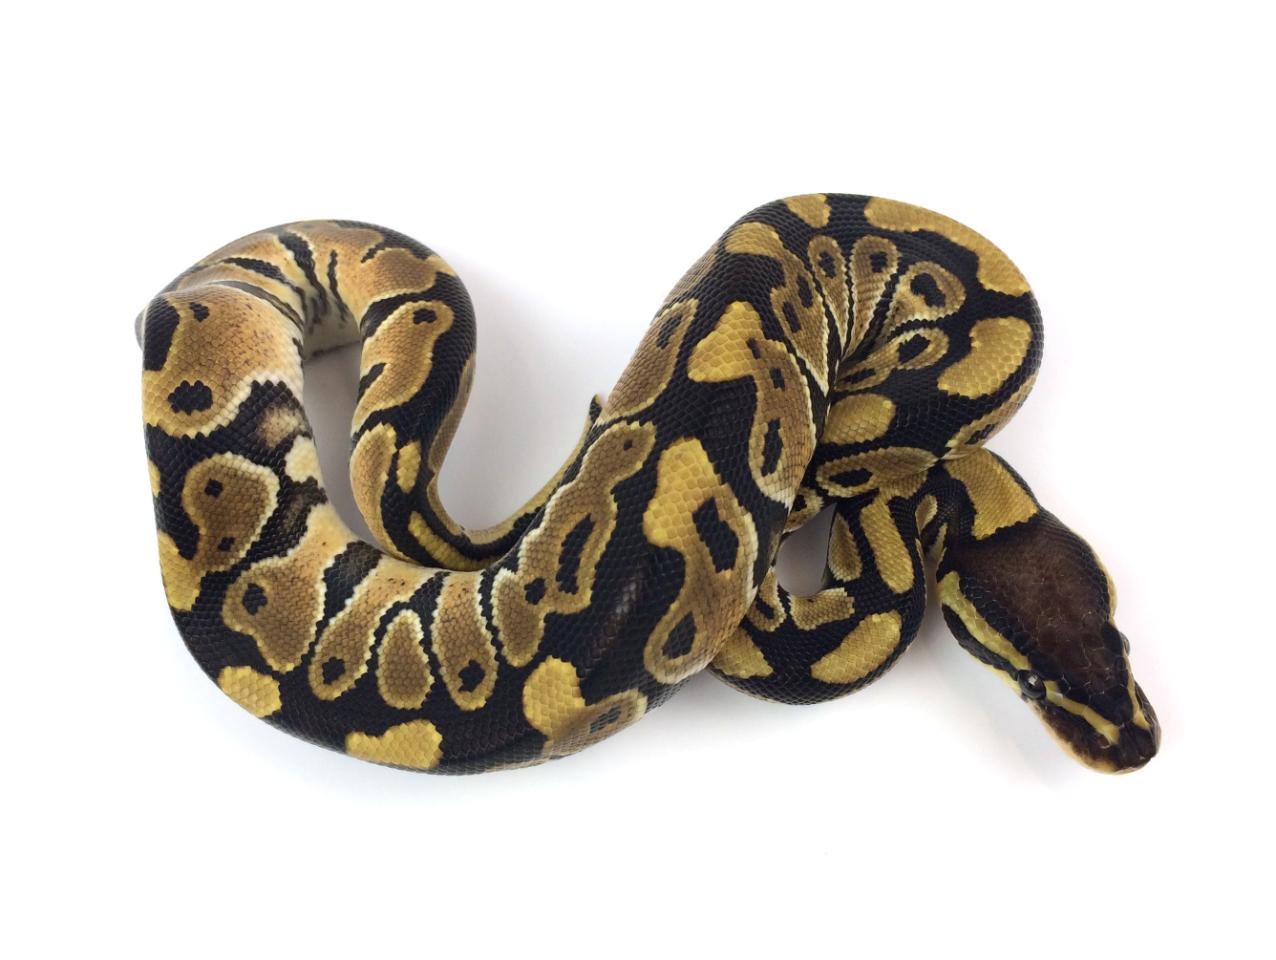 Normal Ball Python by Royal Constrictor Designs